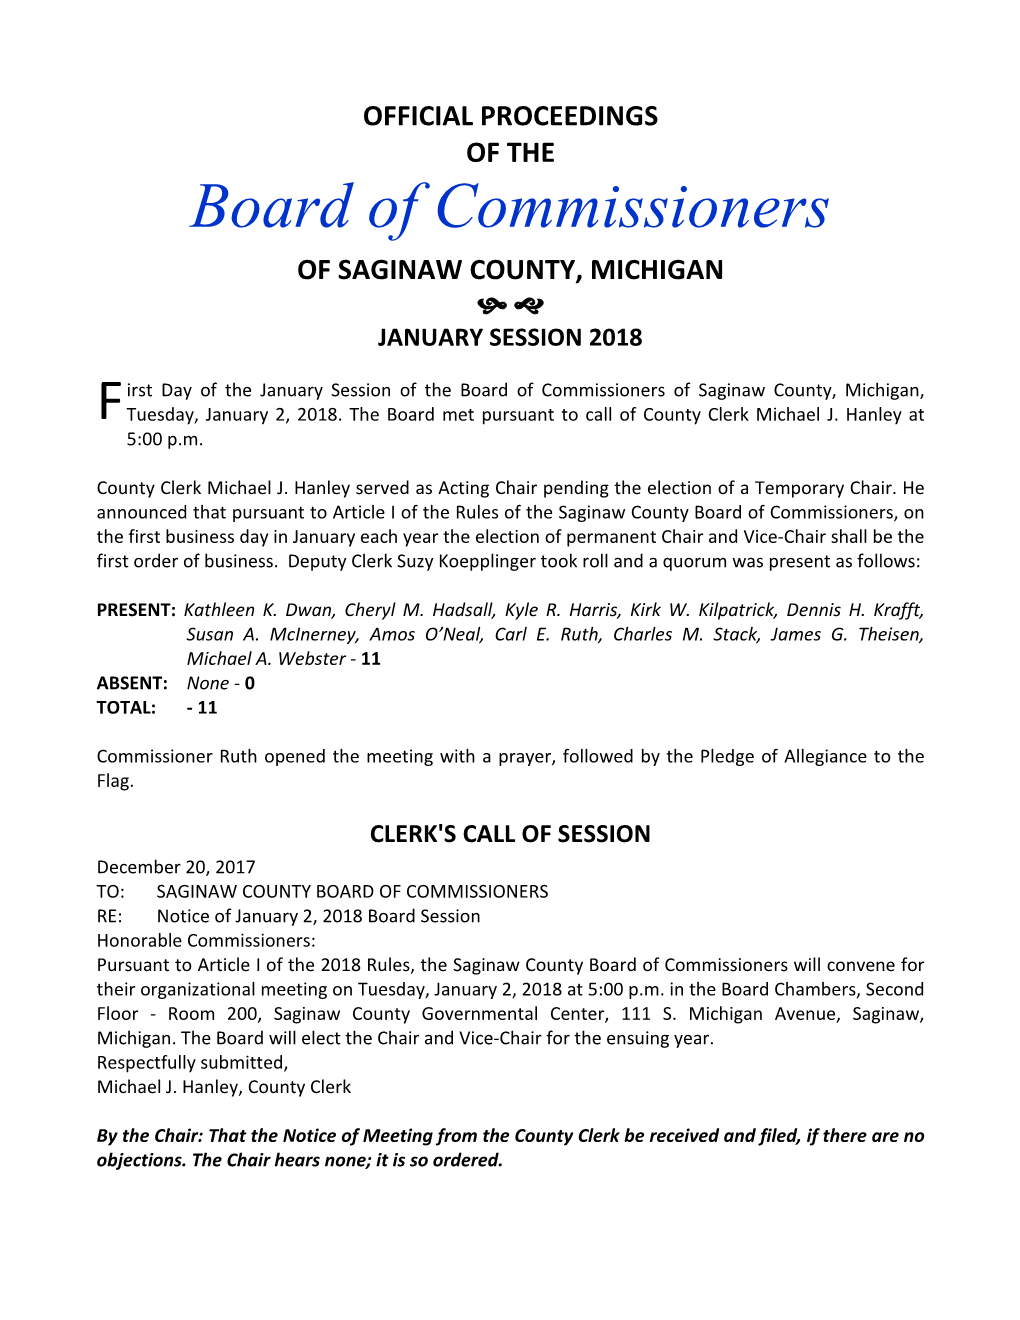 Board of Commissioners of SAGINAW COUNTY, MICHIGAN   JANUARY SESSION 2018